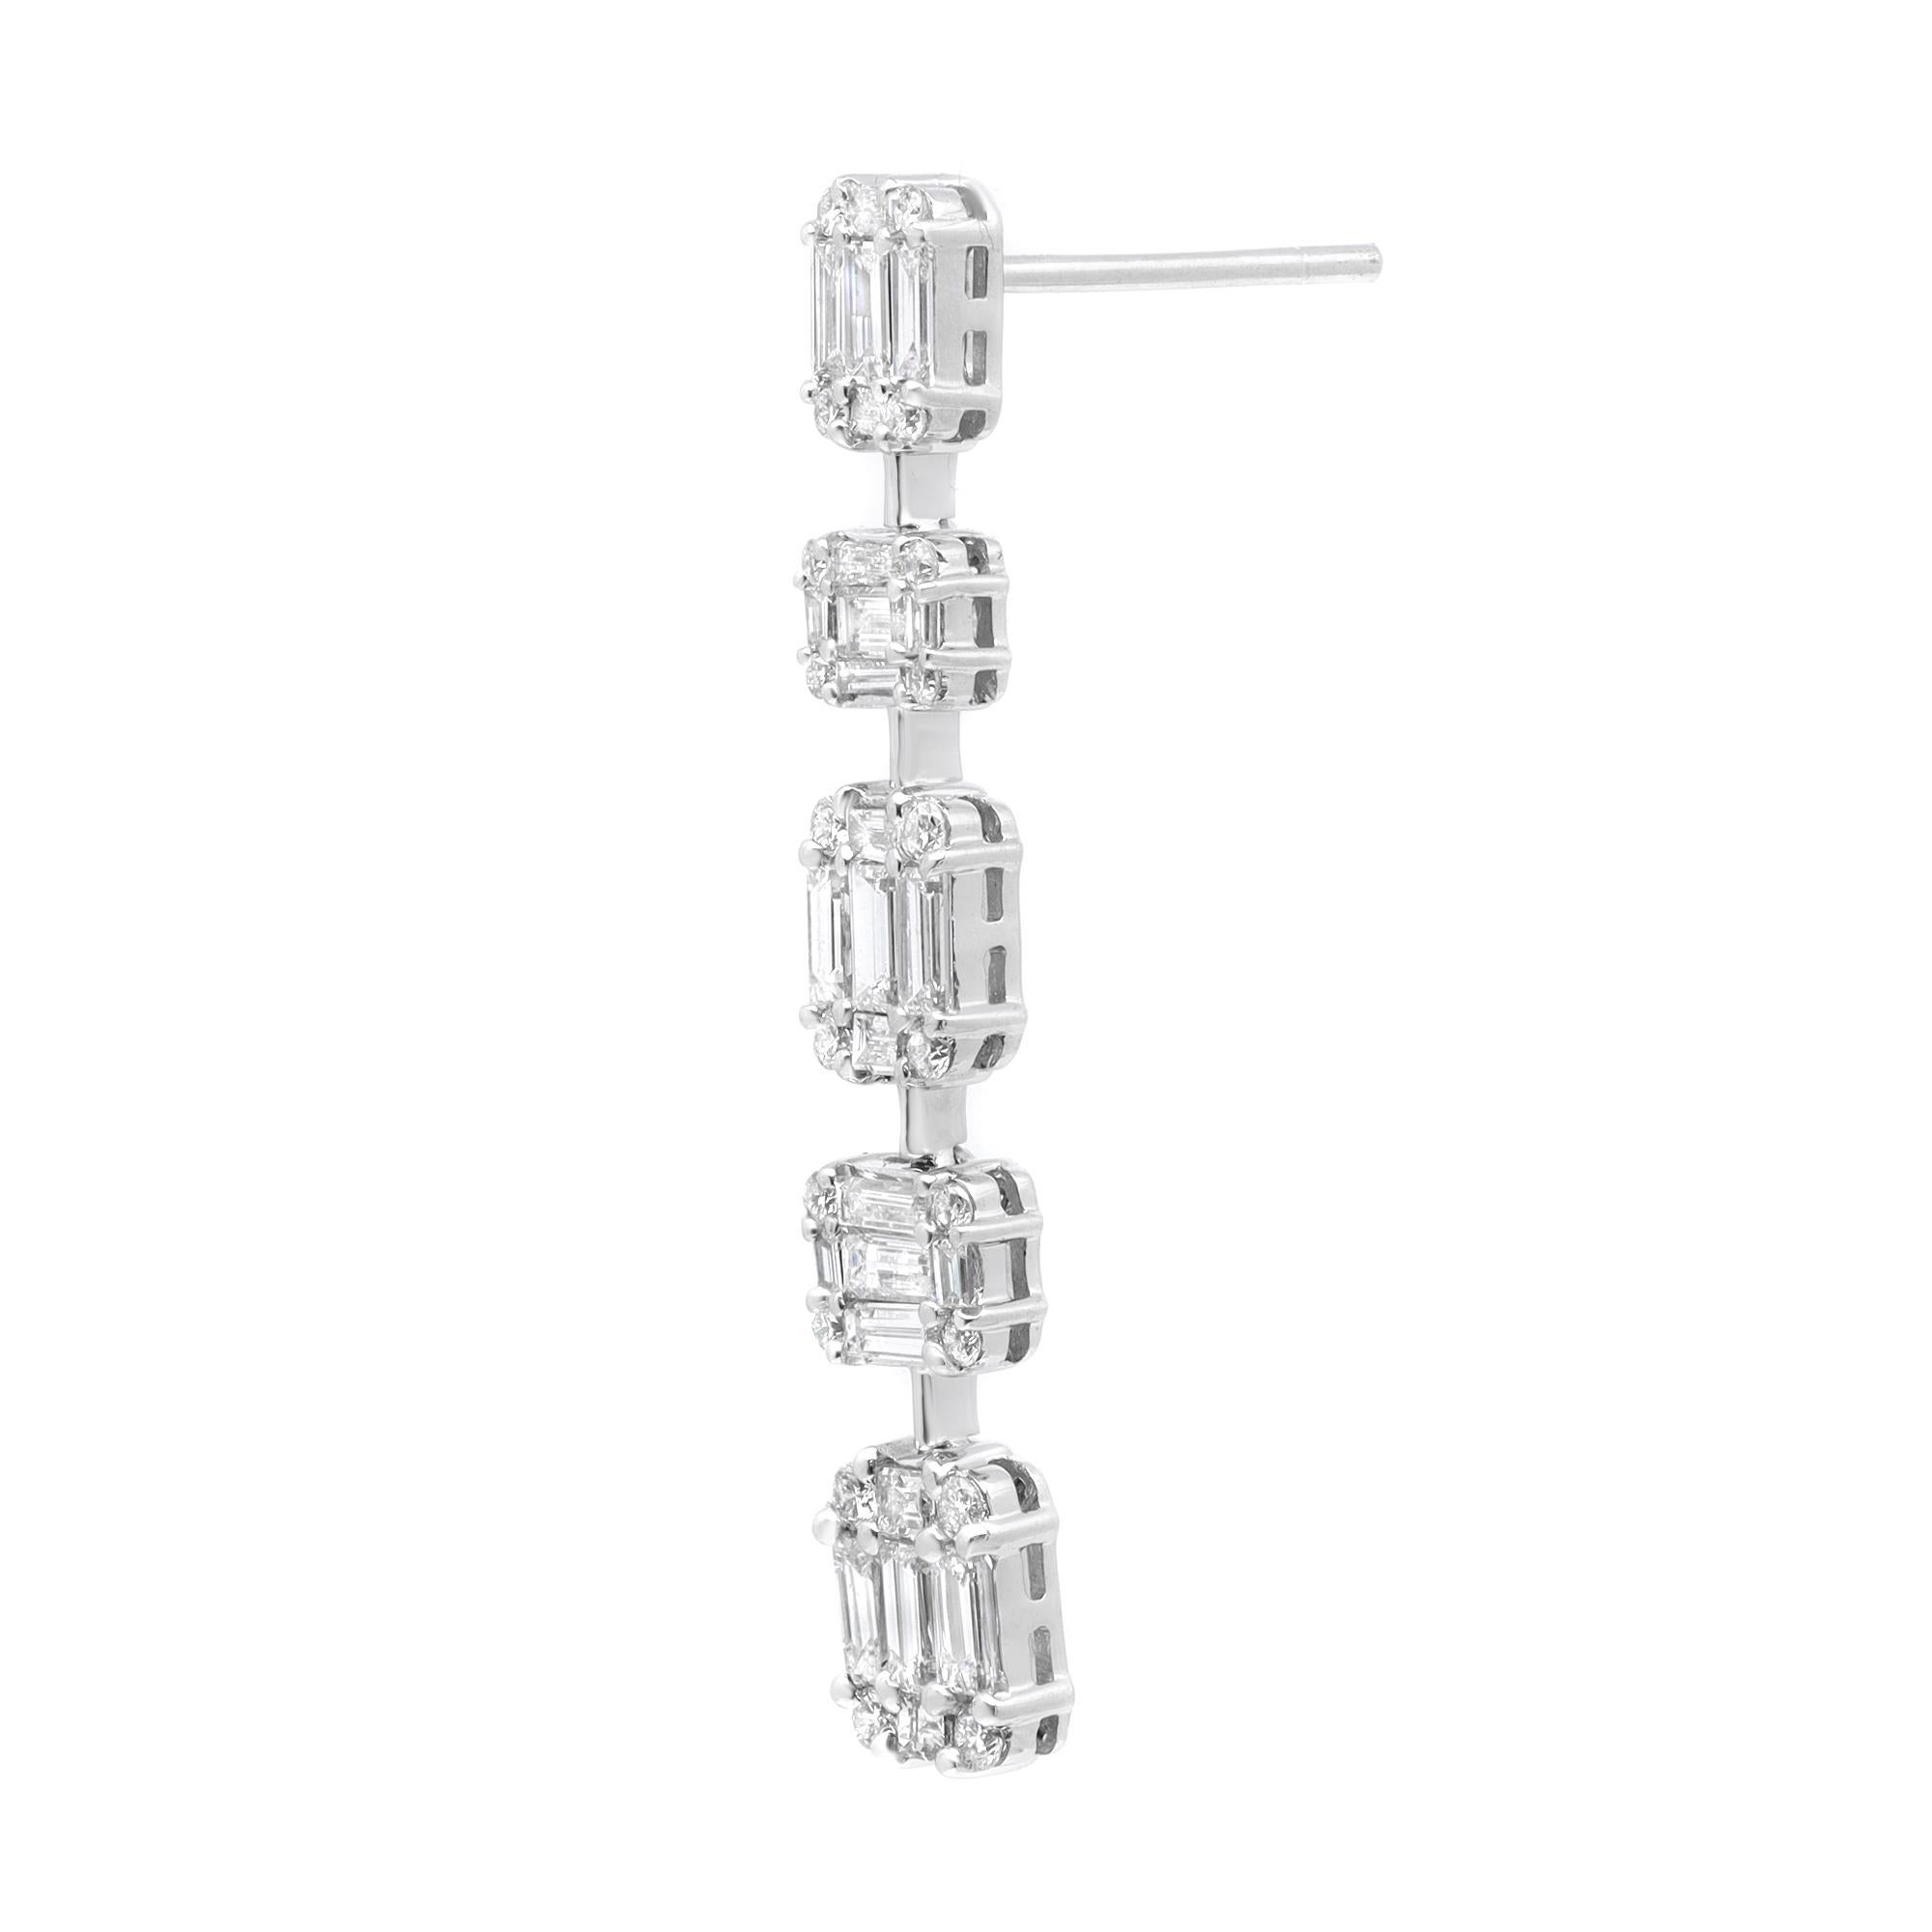 Showcasing these enchanting eye catchy drop earrings, crafted in 18k white gold. These earrings feature channel set Baguette cut and round cut sparkling diamonds weighing 1.93 carats. Diamond quality: color G-H and clarity VS-SI. Earring length: 1.3